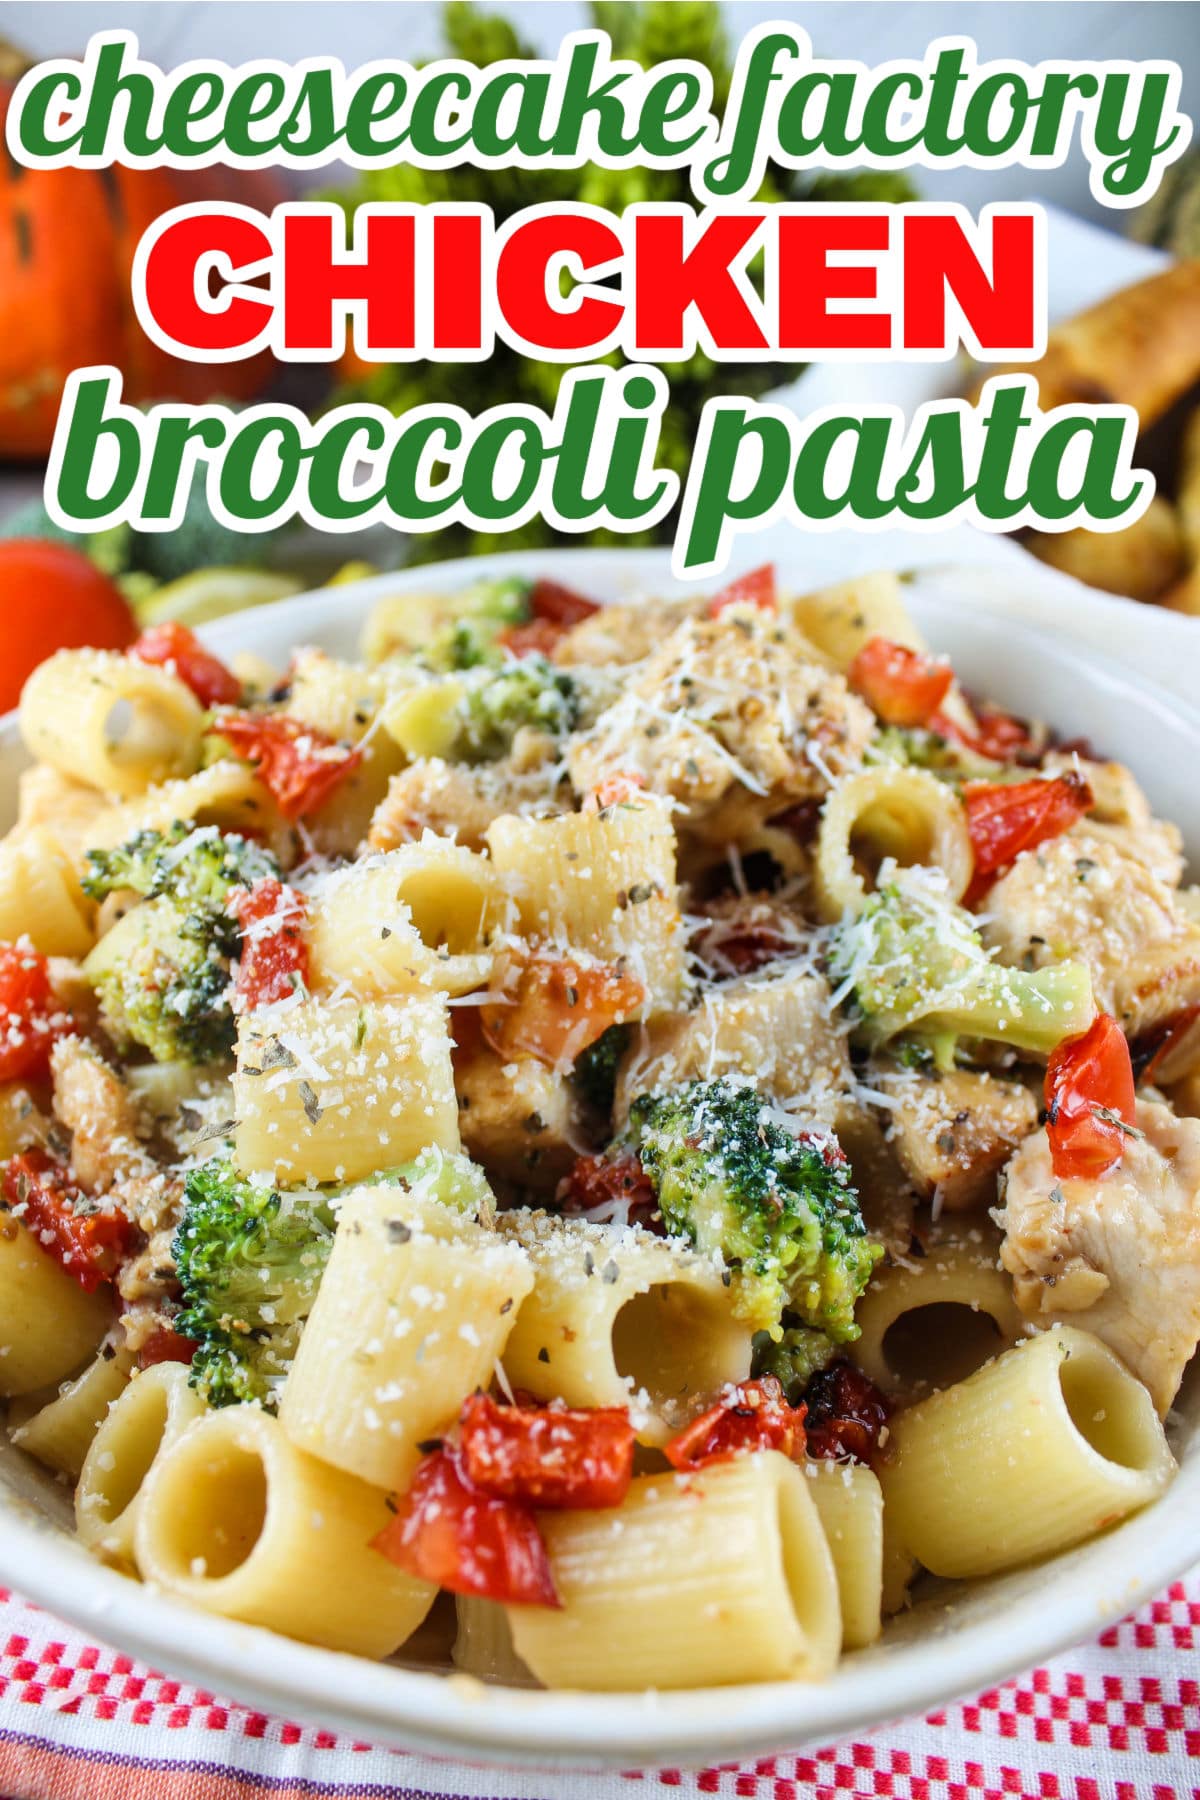 This Copycat Chicken Broccoli Pasta is exactly like the one from Cheesecake Factory but BETTER because I add more chicken and more broccoli! I couldn't get enough of it! Plus there's a touch of cheese to add a bit of creaminess to the sauce. So good! via @foodhussy